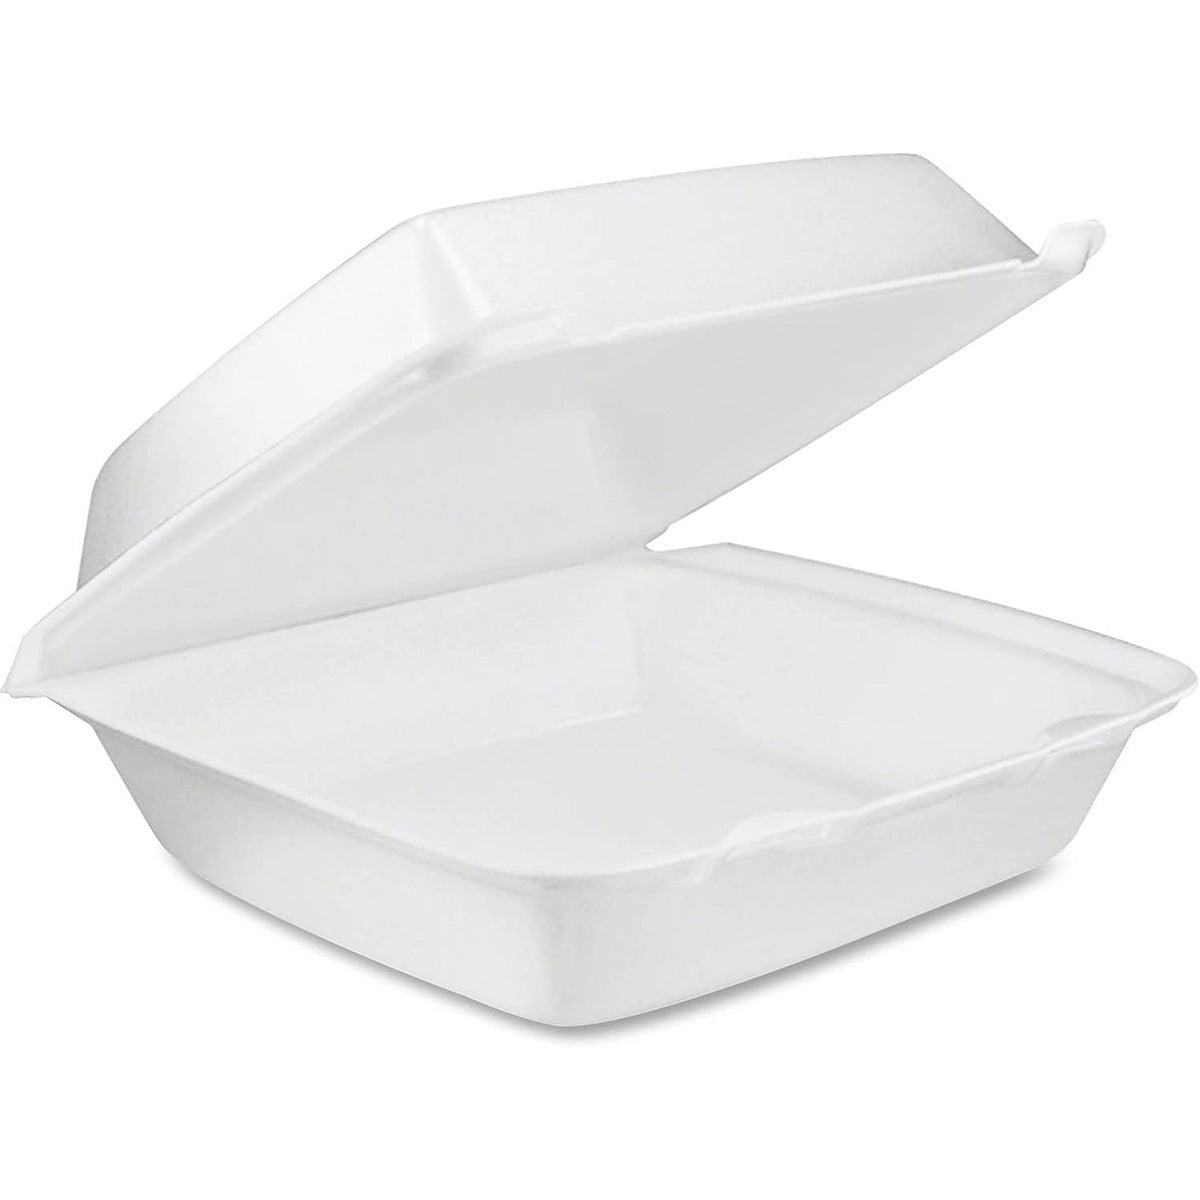 Dart 90HTPF1R White Foam Square Take Out Container with Hinged Lid. Performer. ( 200 Pieces )